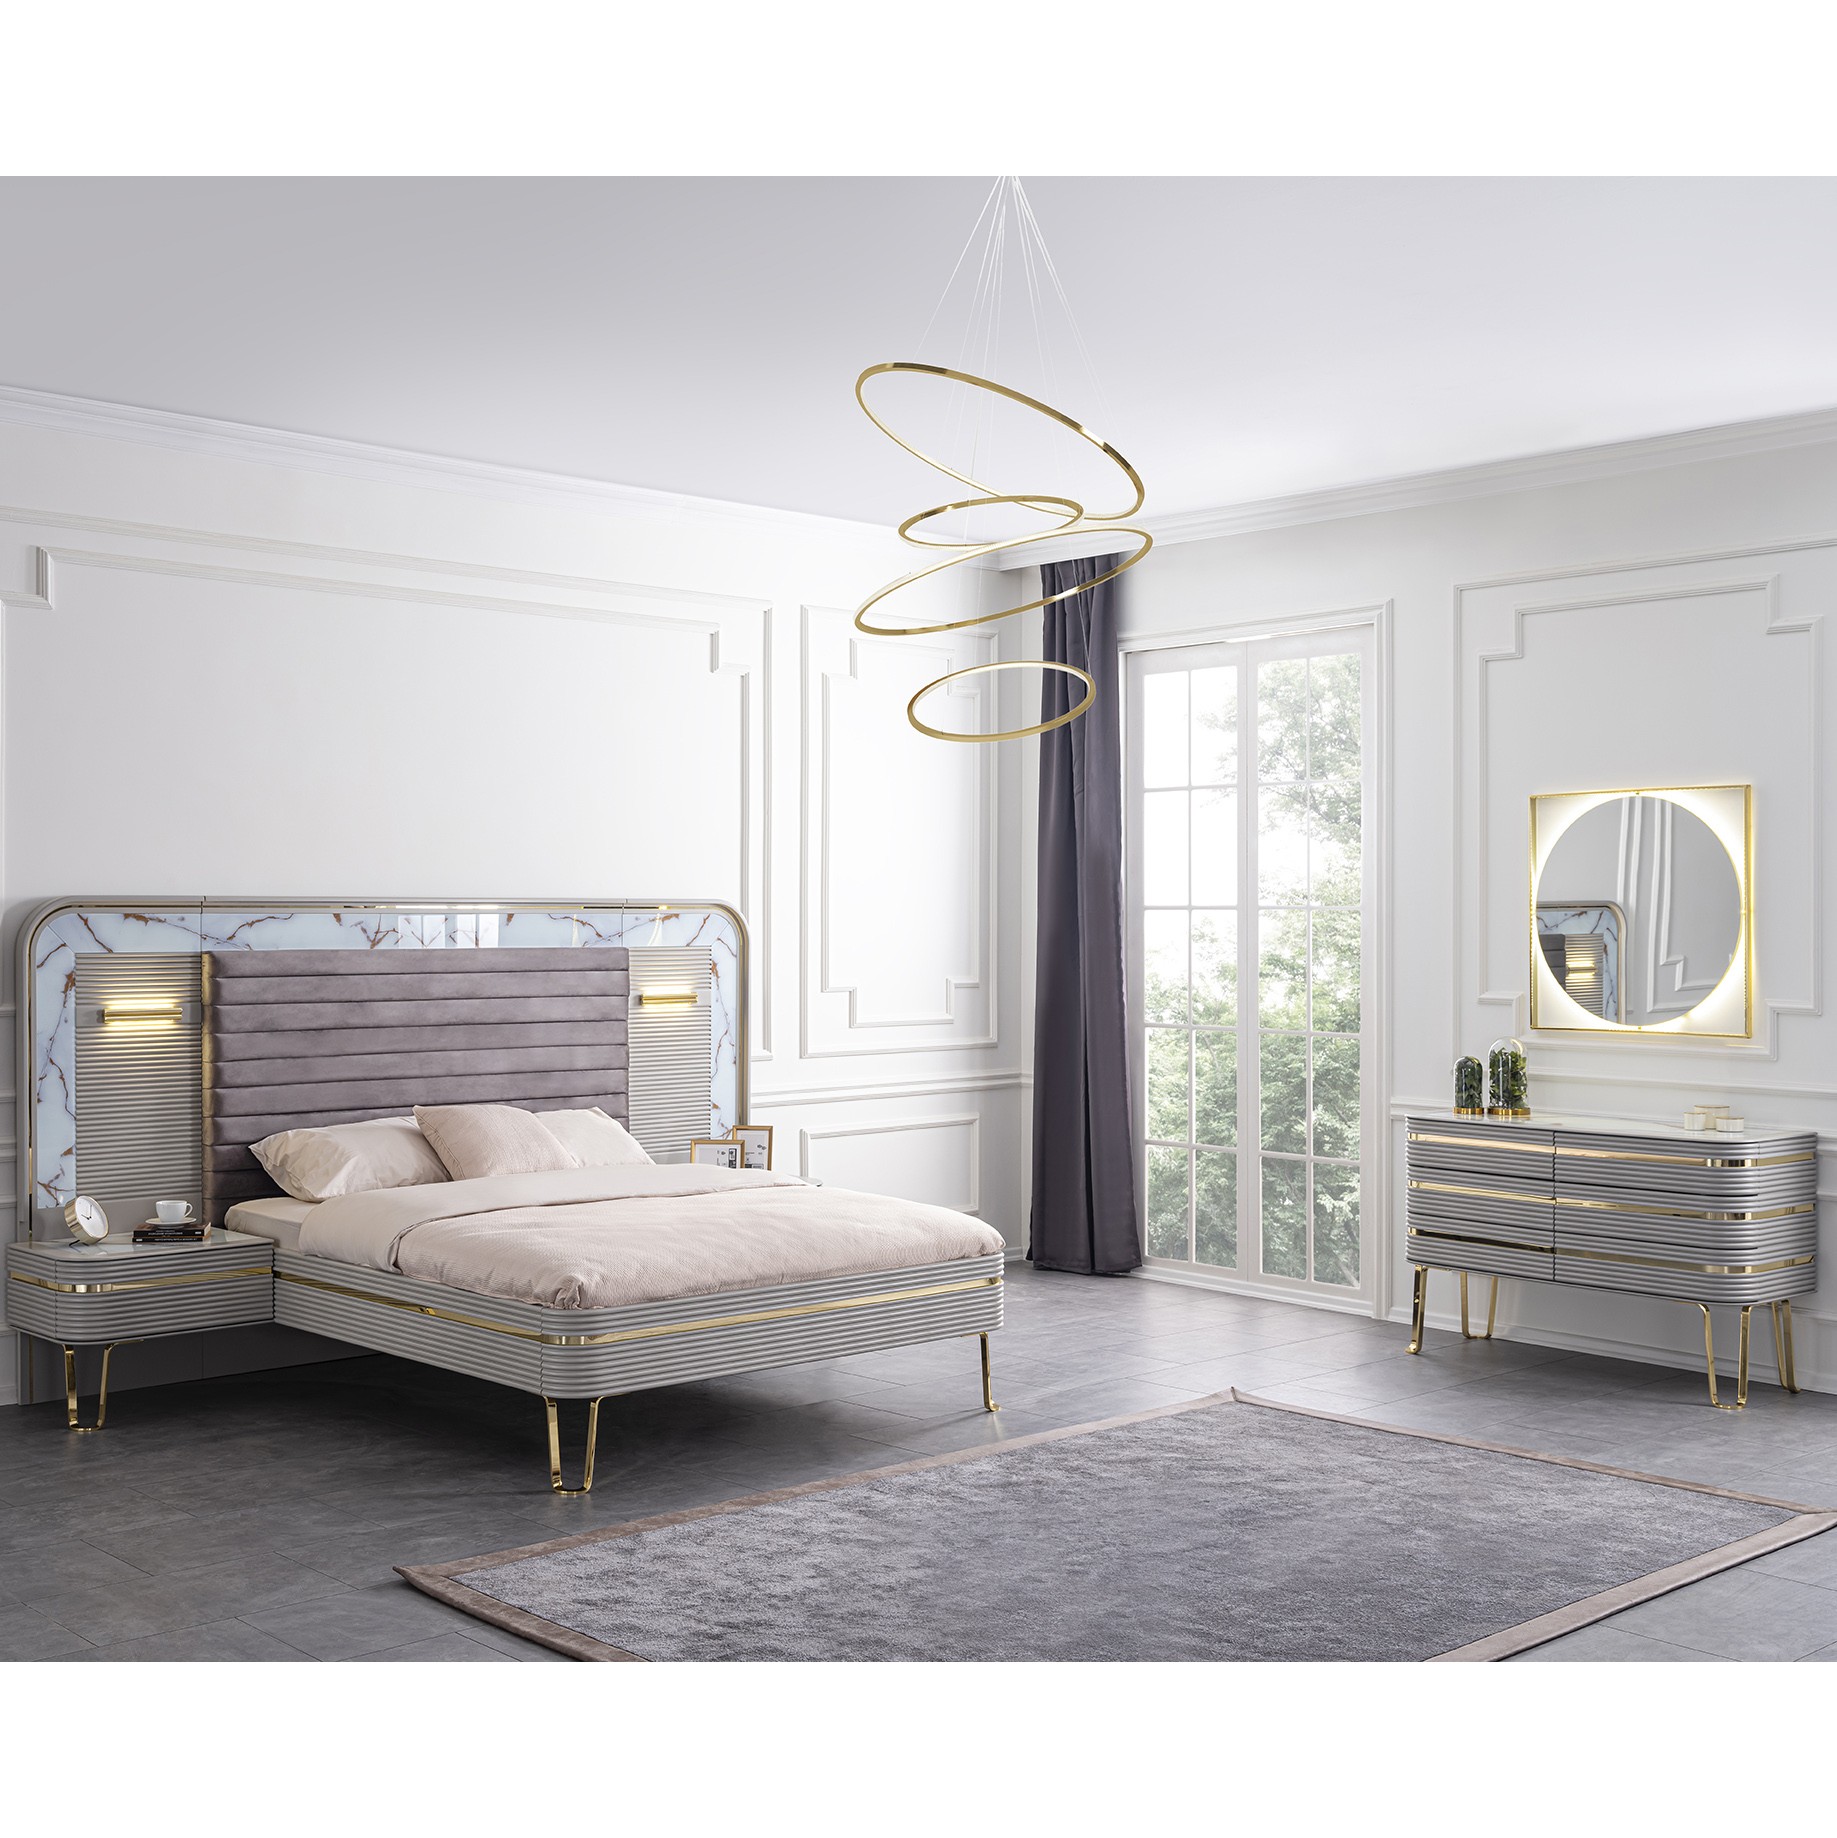 Gucci Bedroom (Bed Without Storage 160x200cm)